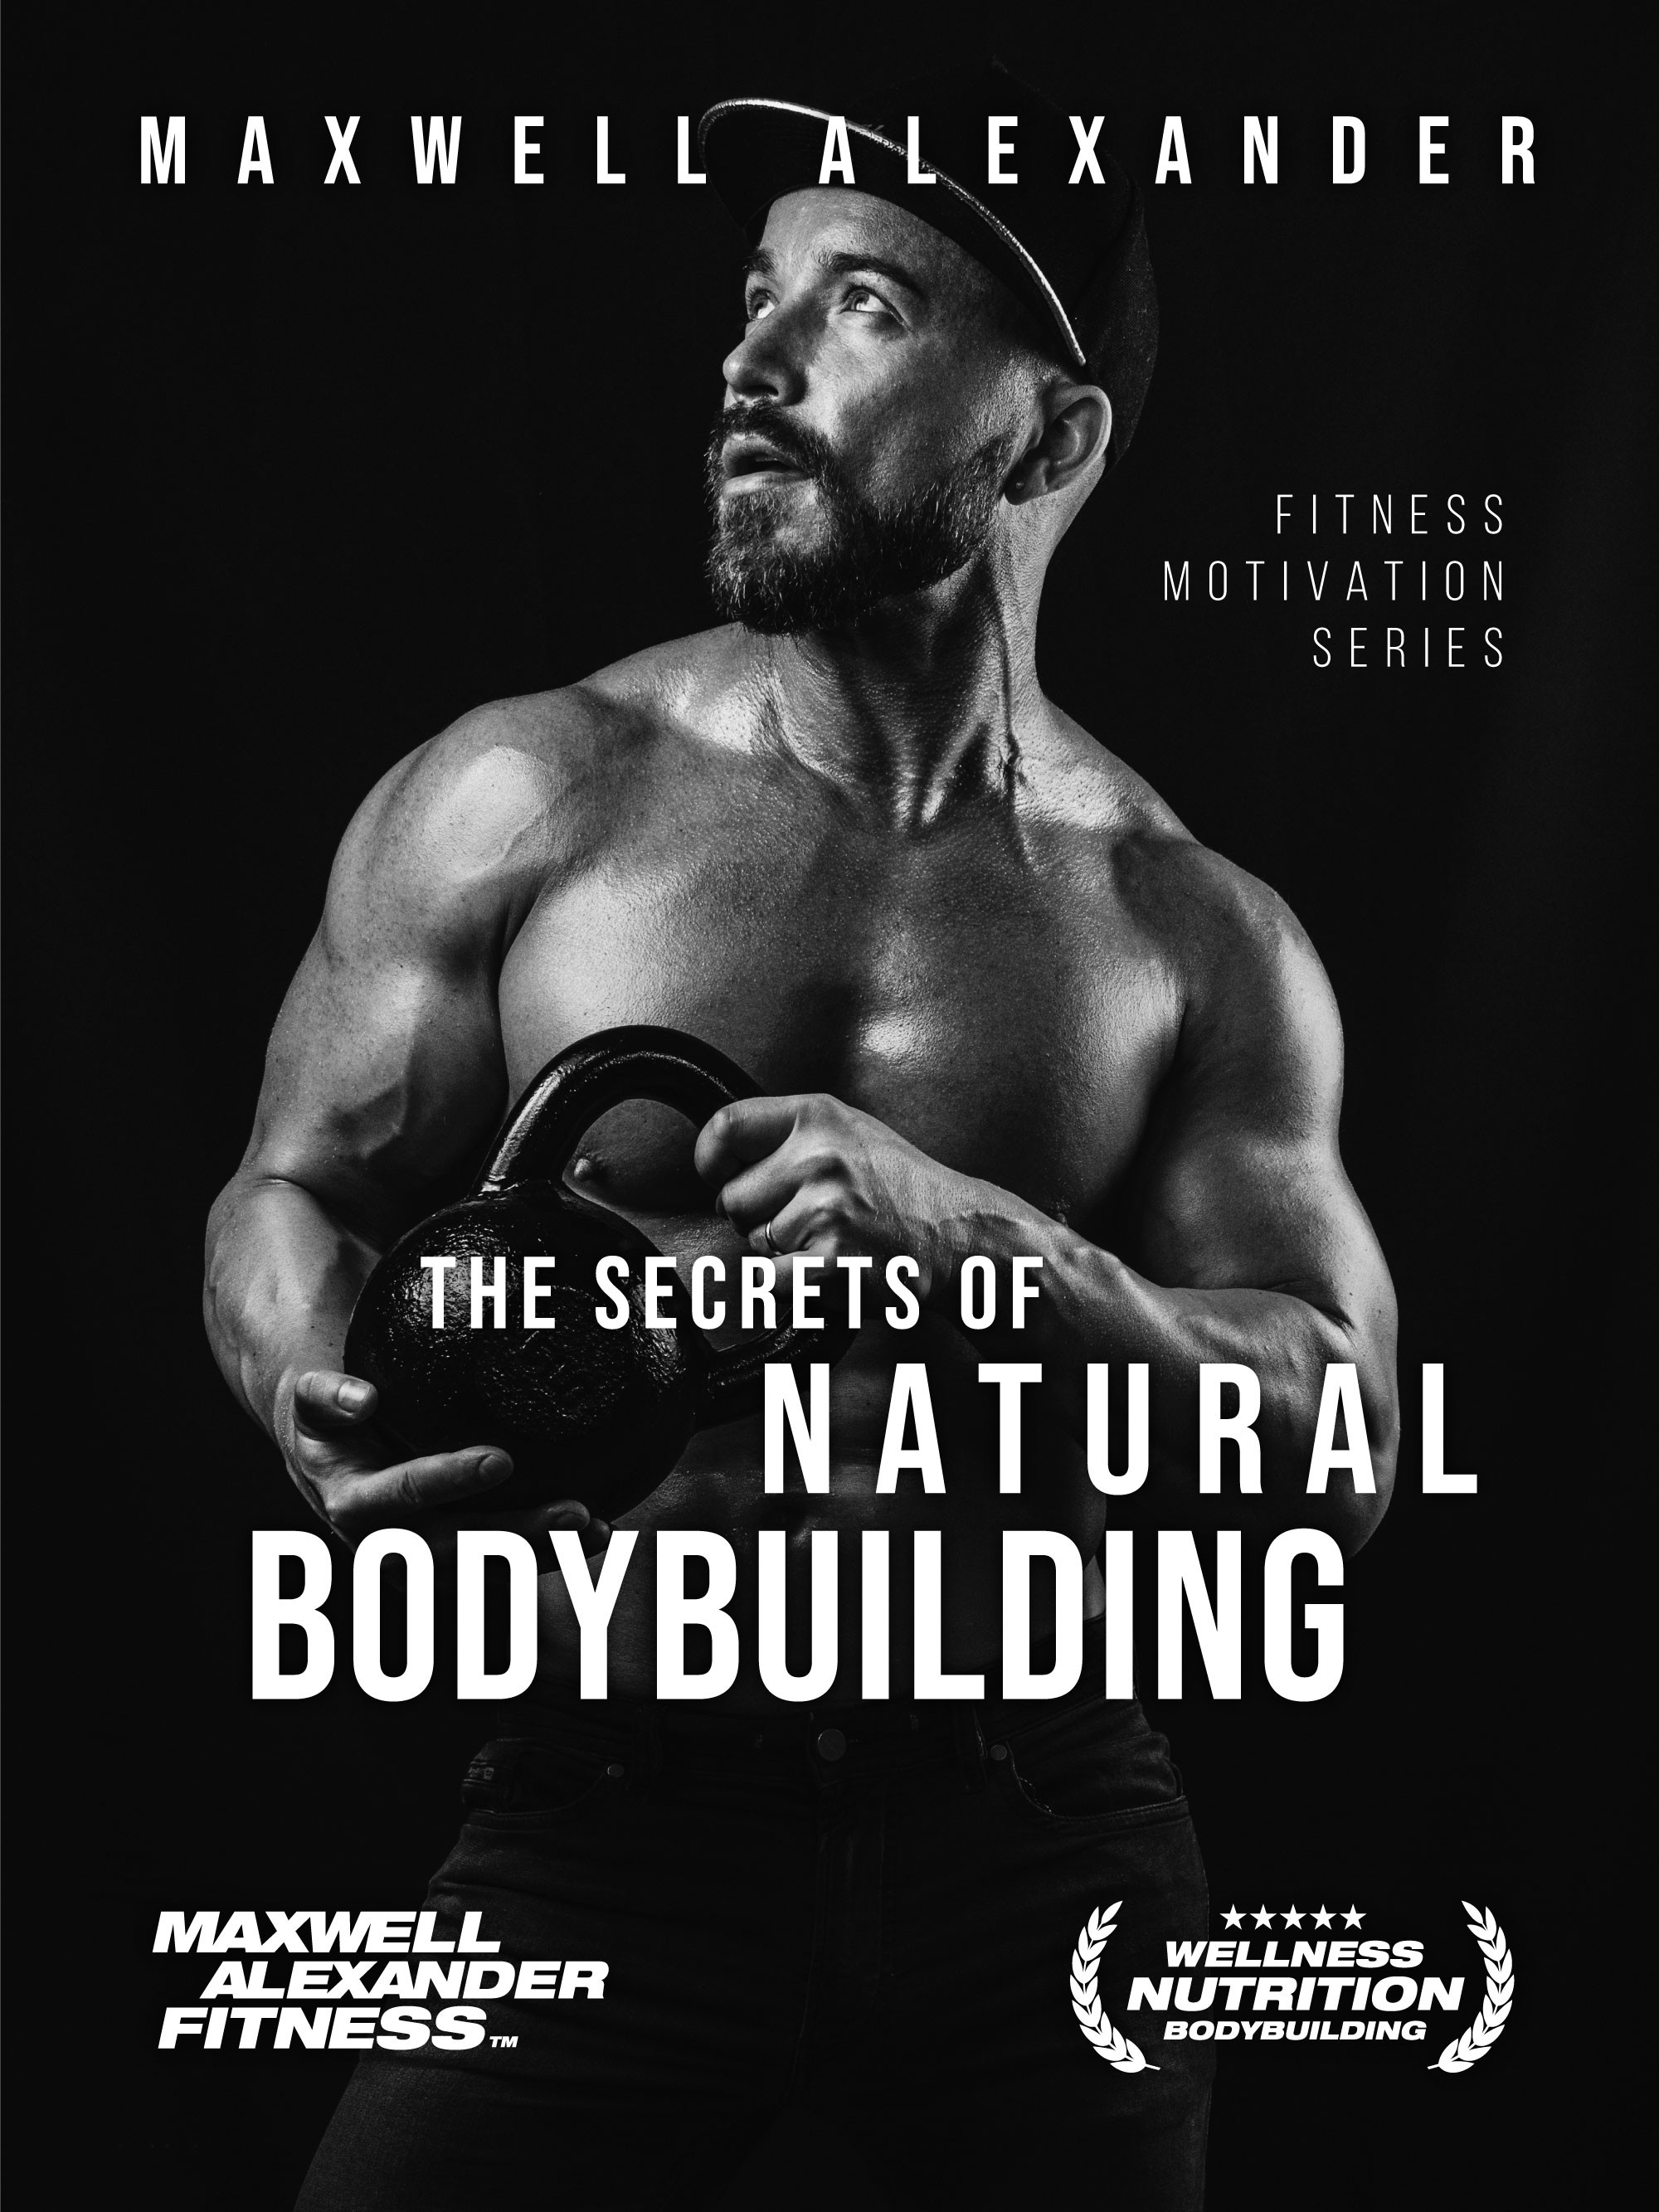 Unleash Your True Potential with "The Secrets of Natural Bodybuilding" by Maxwell Alexander: A Comprehensive Guide to Transforming Your Physique Naturally